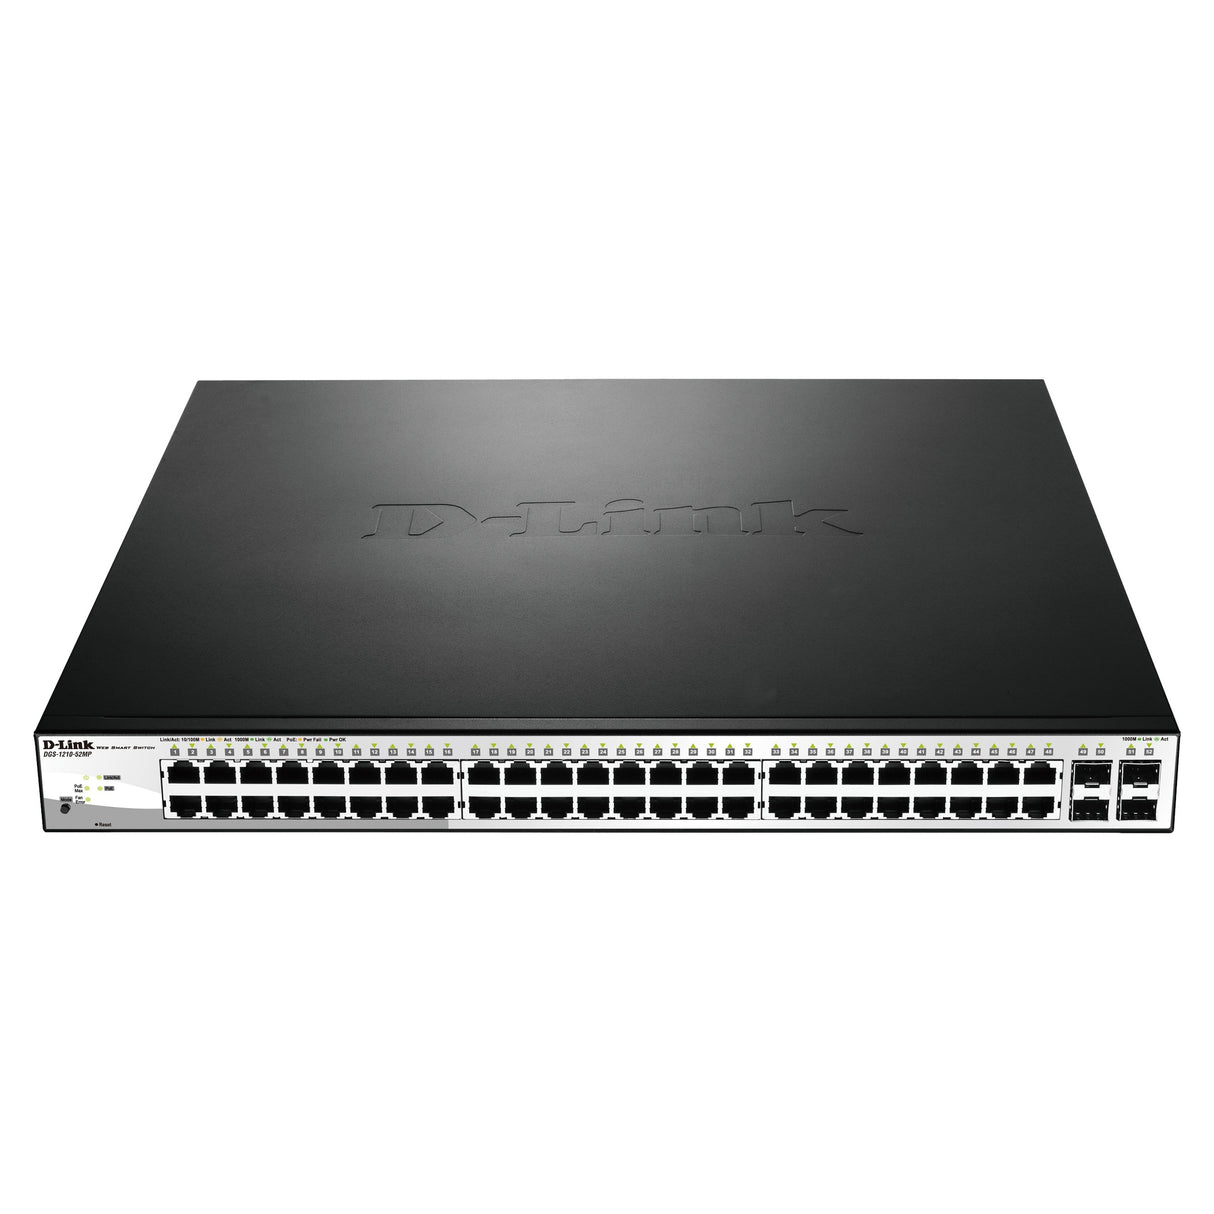 D-Link DGS-1210-52MP Ethernet Switch - 52 Ports - Manageable - Gigabit Ethernet - 10/100/1000Base-T, 1000Base-X - 3 Layer Supported - Modular - 4 SFP Slots - 48.90 W Power Consumption - 370 W PoE Budget - Twisted Pair, Optical Fiber - PoE Ports - 1U High